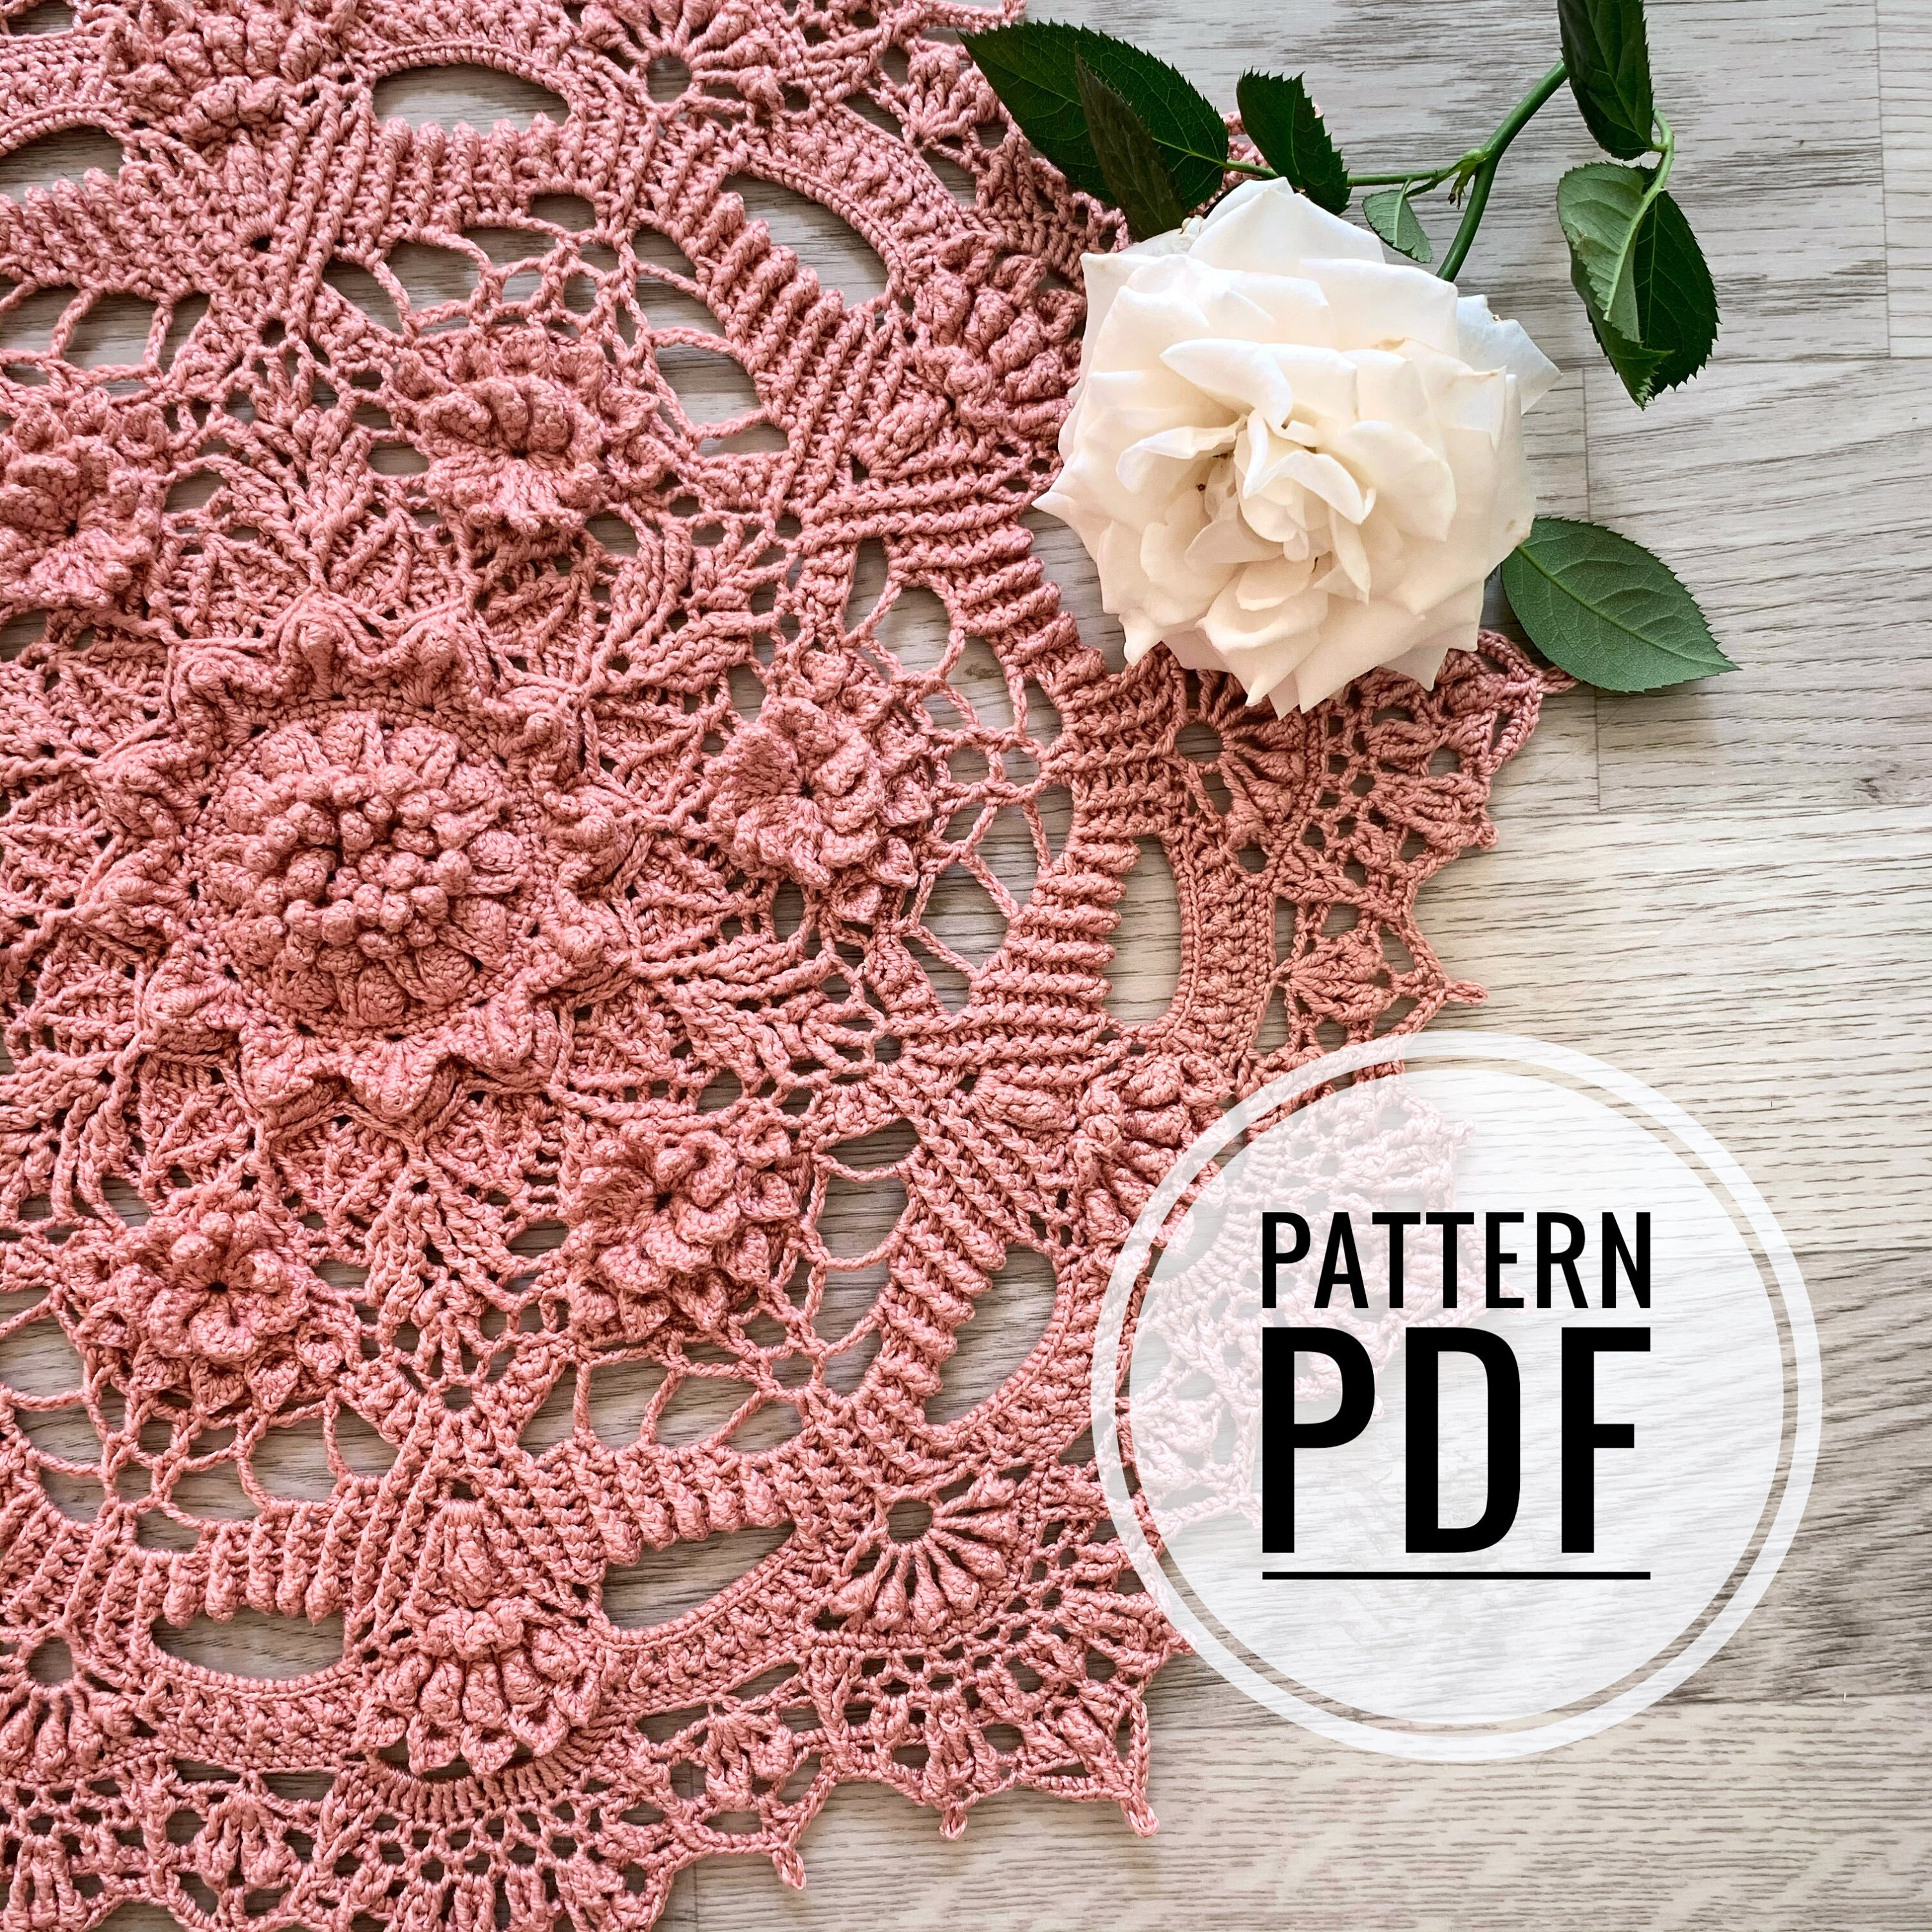 Vintage Handmade Doily,crochet Lace Doilies, Round Doily for Sale ,lace  Table Cover,tablecloth,wedding Doilies,gift for Her 